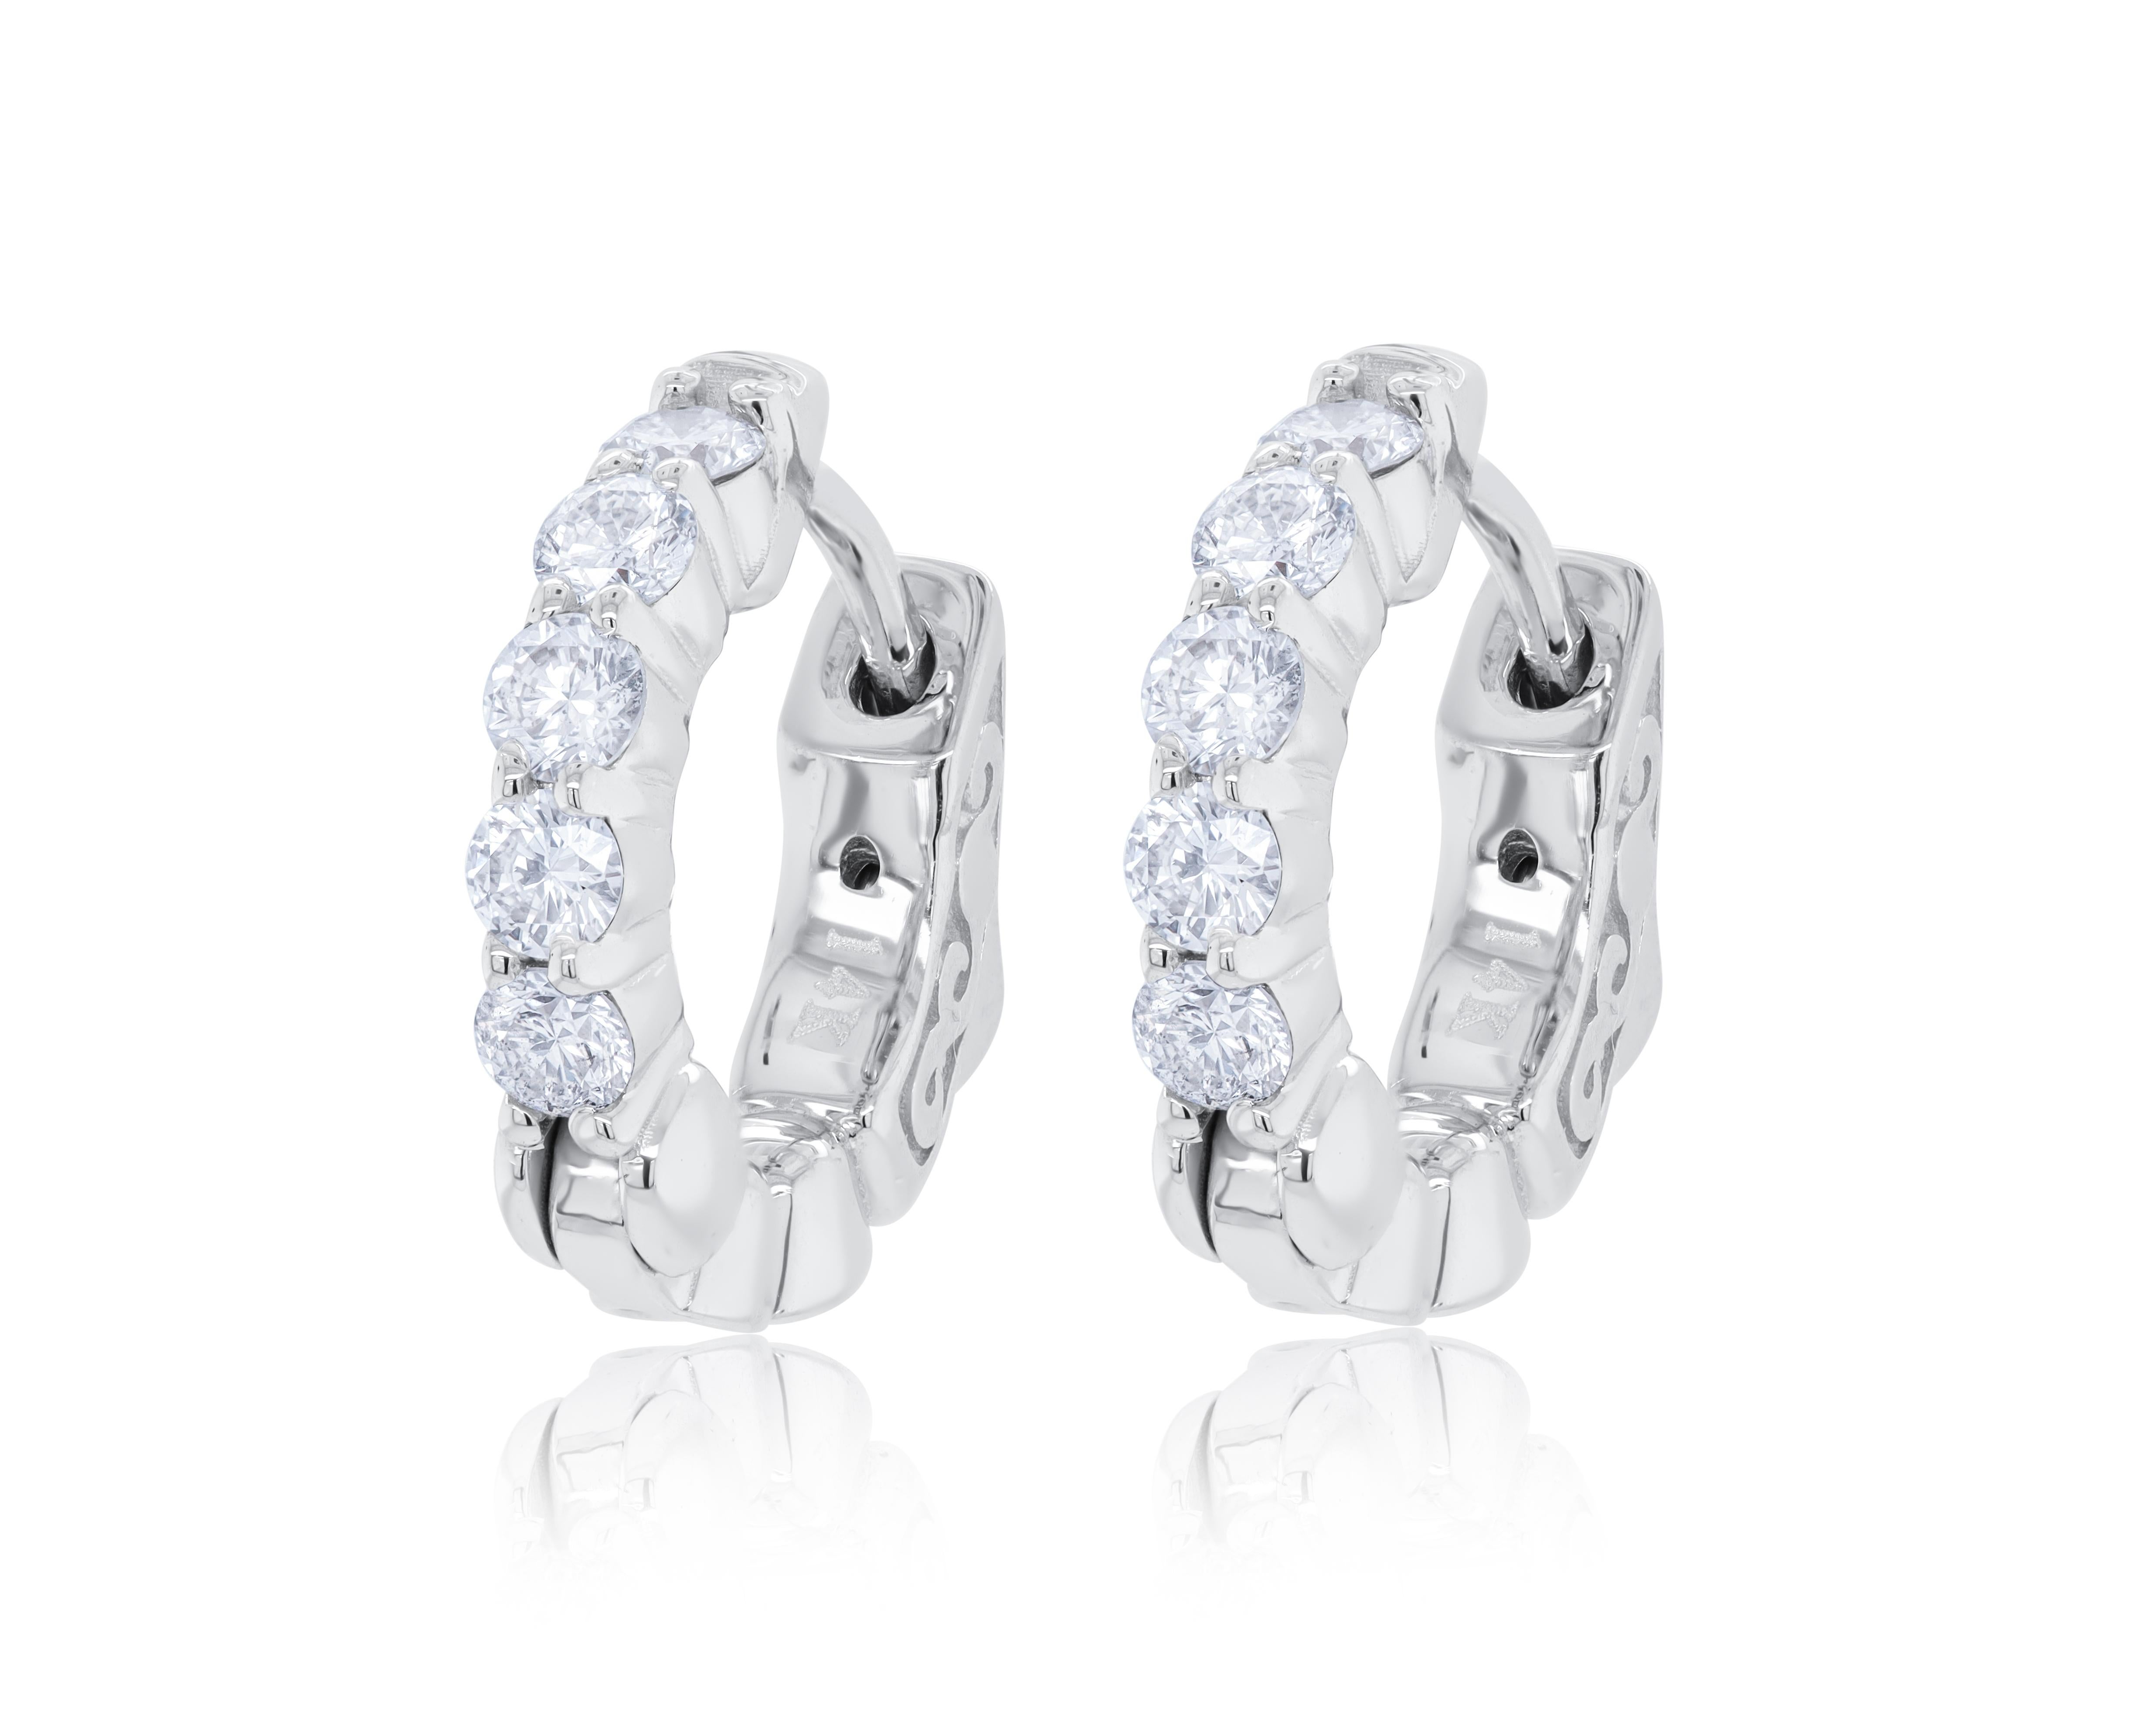 14K White Gold Diamond Earrings featuring 1.80 Carat T.W. of Natural Diamonds

Underline your look with this sharp 14K White Gold Diamond Earrings. High quality Diamonds. This Earrings will underline your exquisite look for any occasion.

. is a